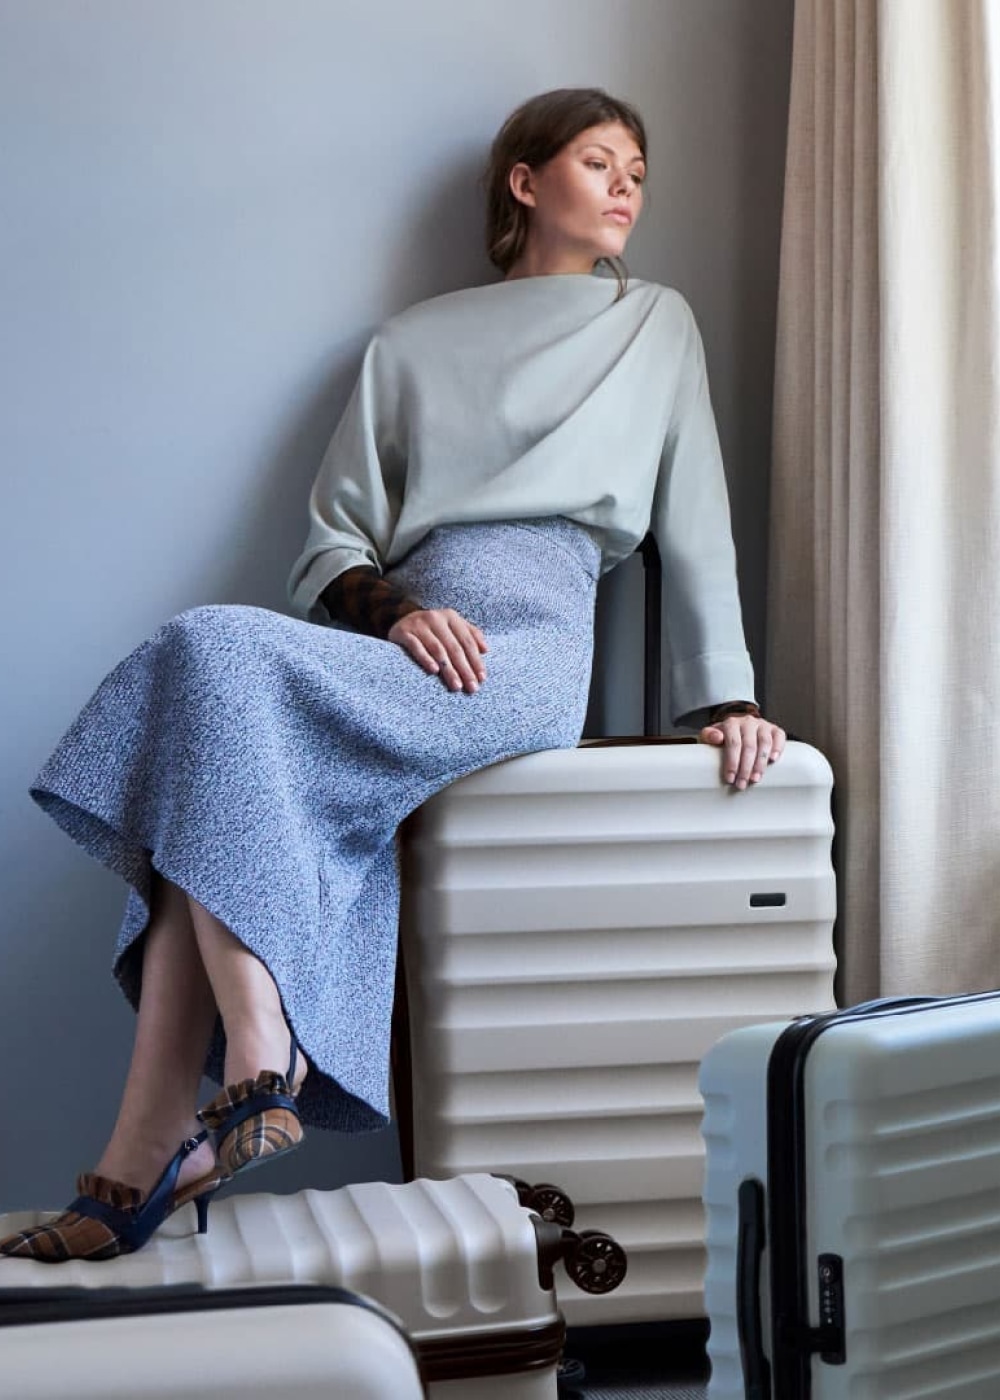 A woman sitting on a hard-case suitcase looking out a hotel window.